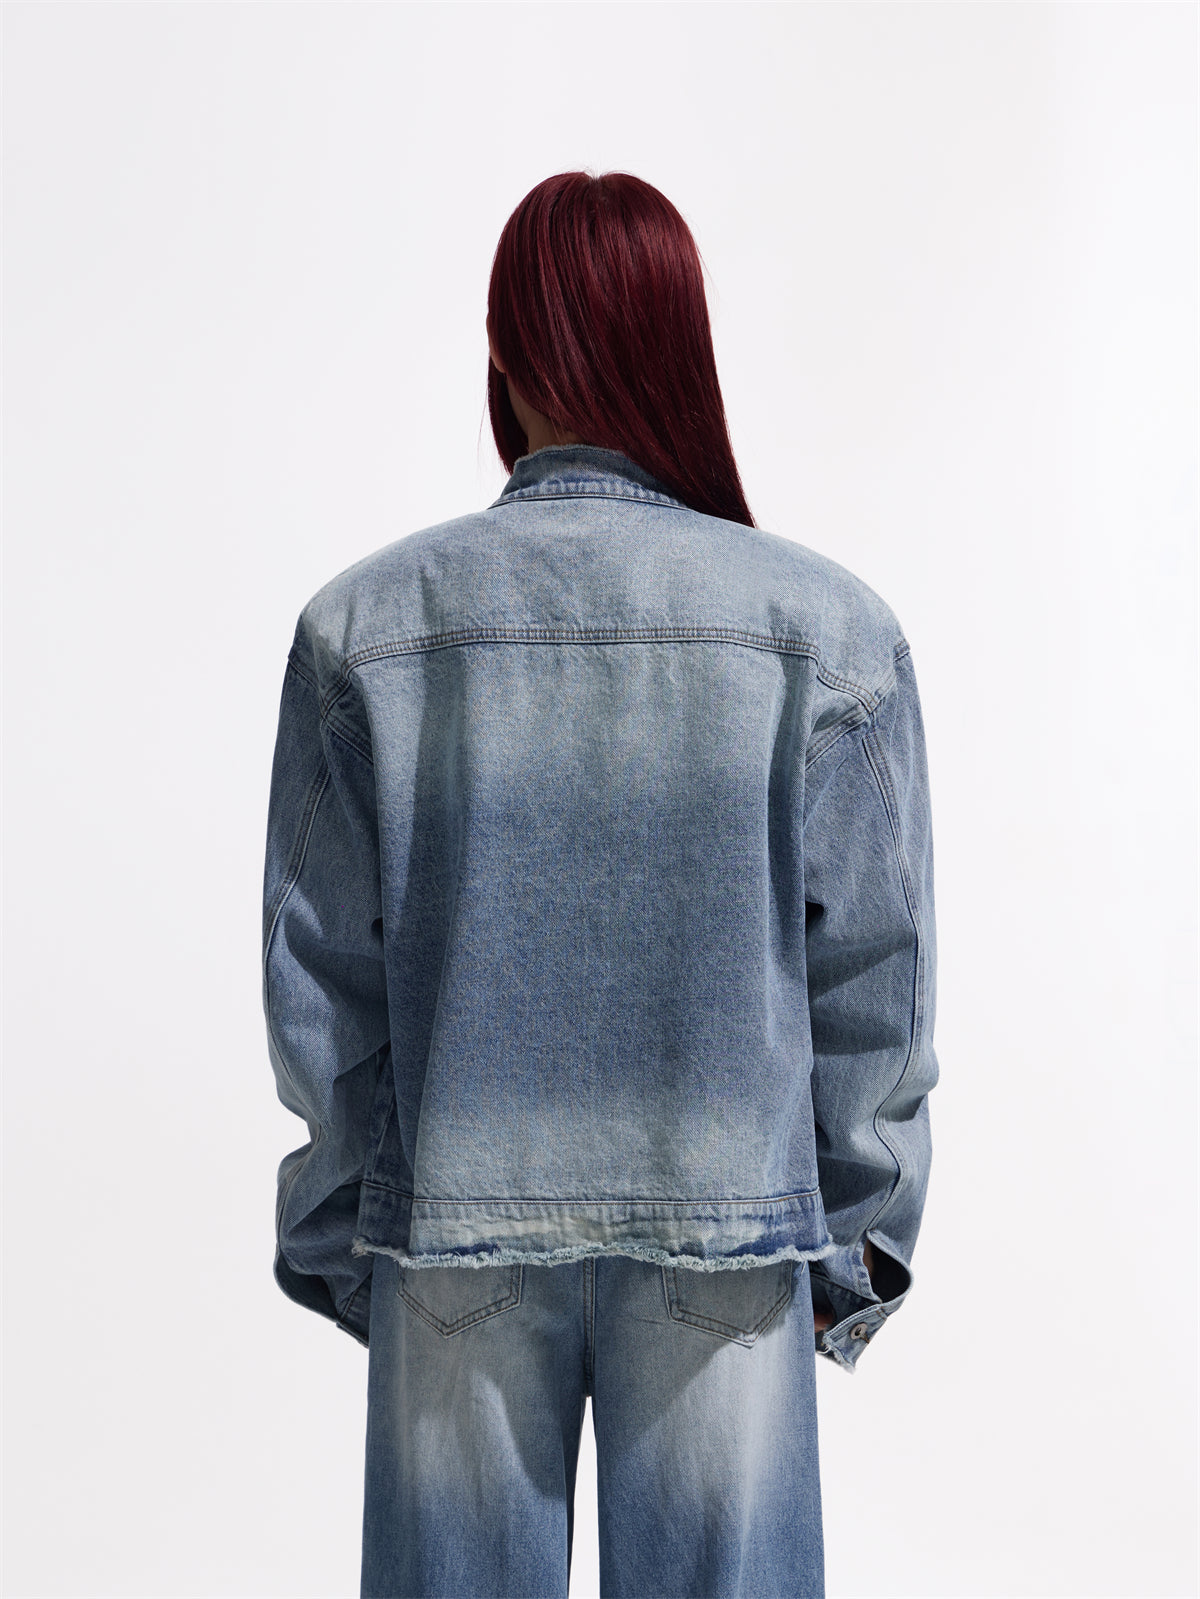 DENIM JACKET WITH YOUR CHOICE DESIGN ON BACK | flathatrags